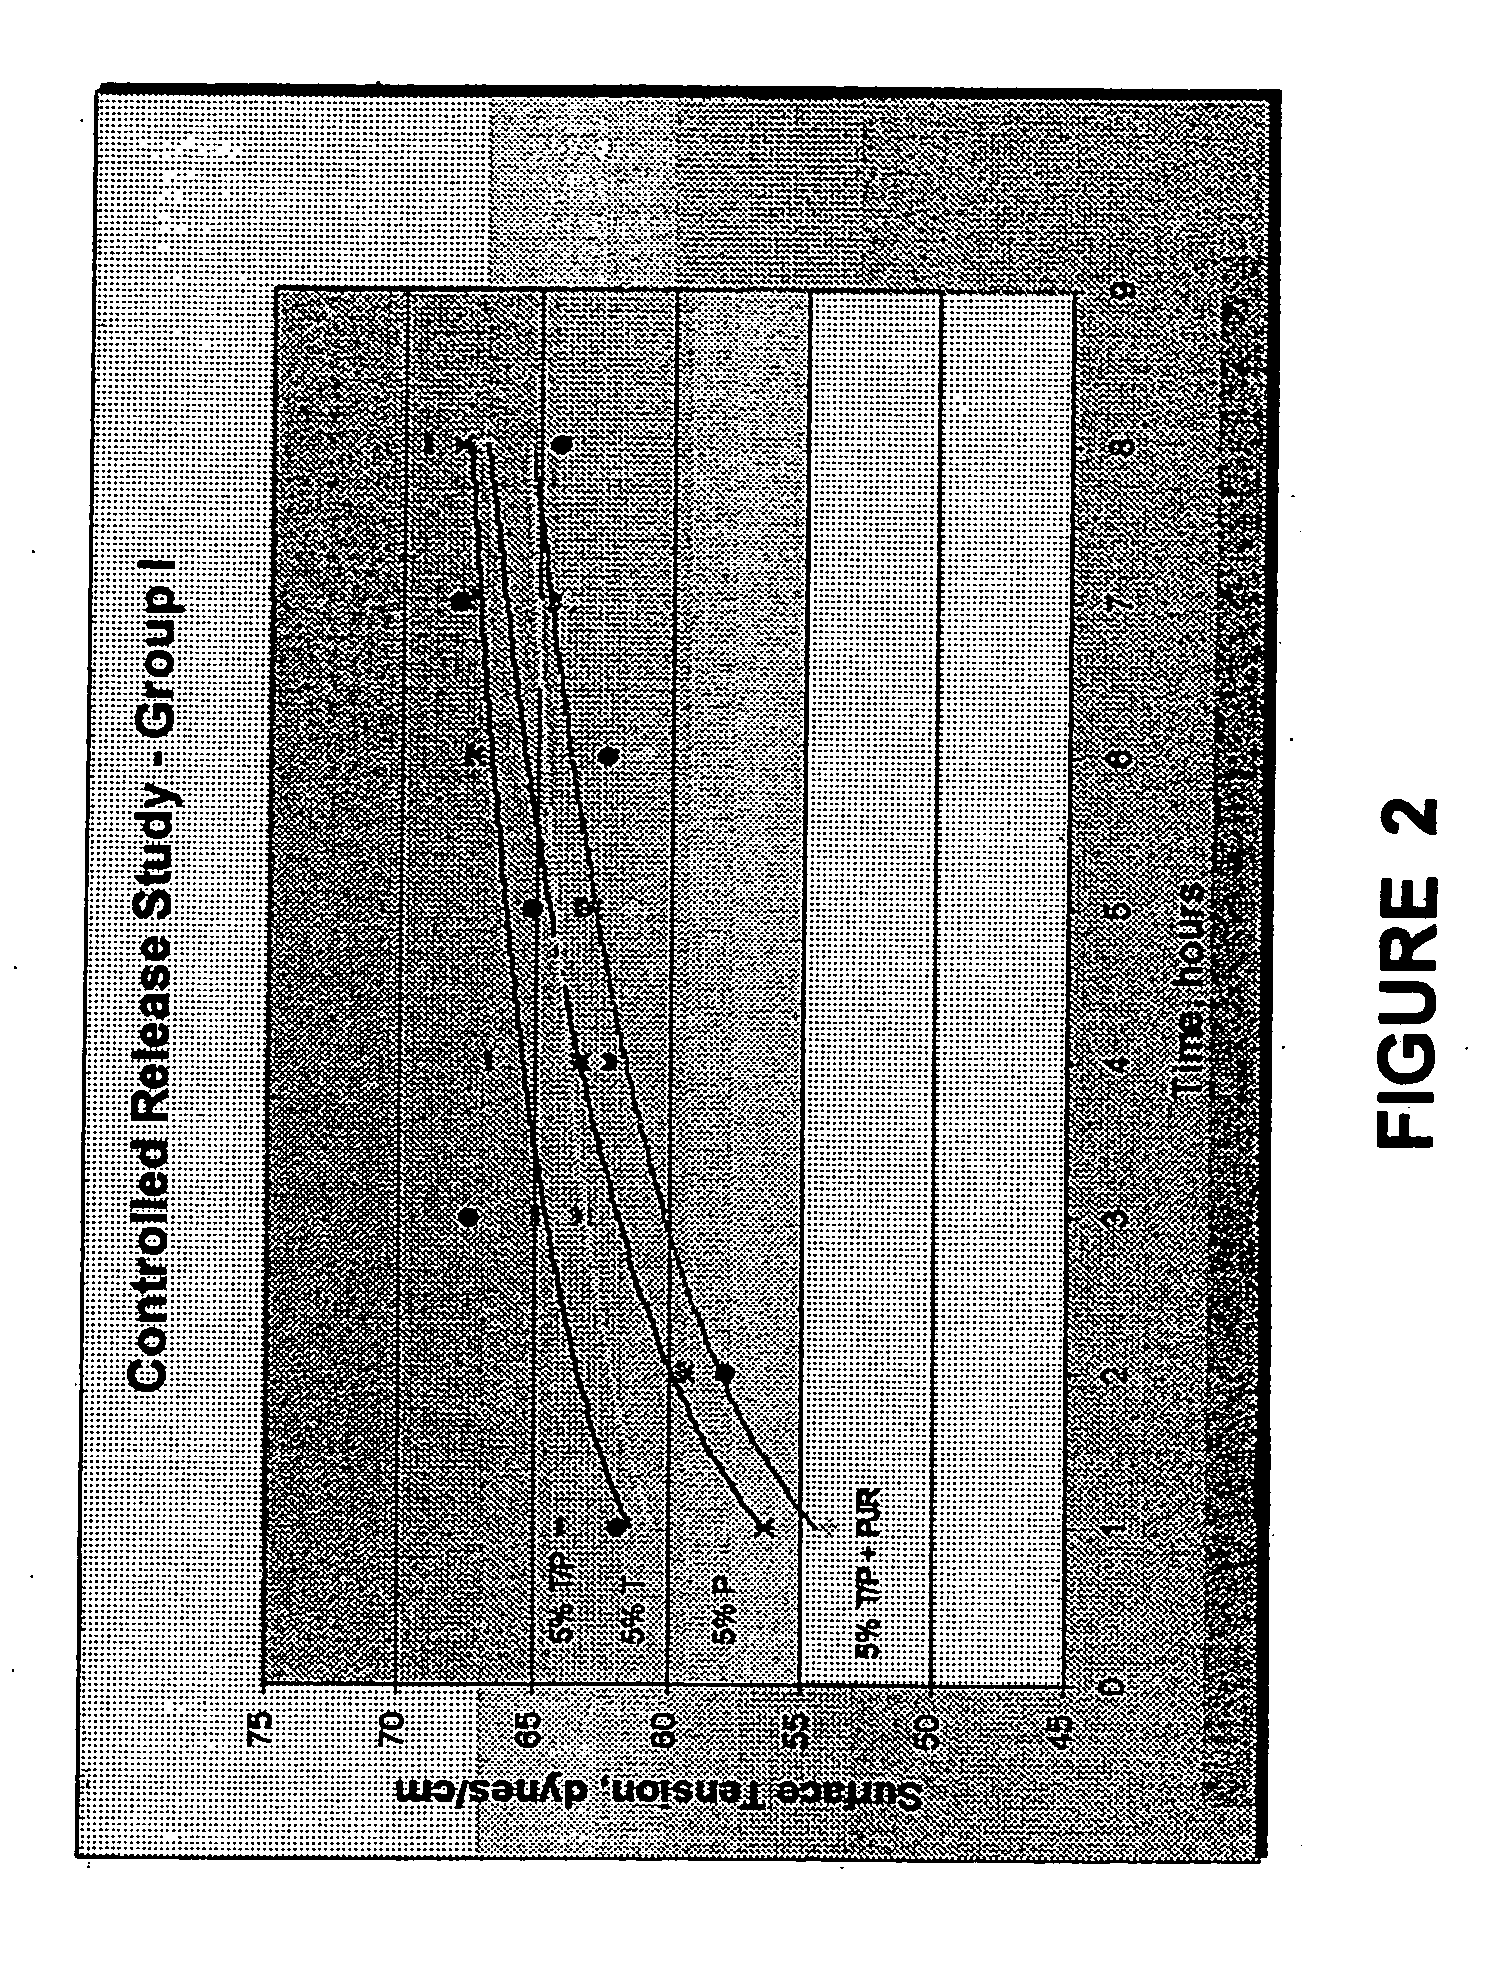 Method and composition for reducing contact lens swelling